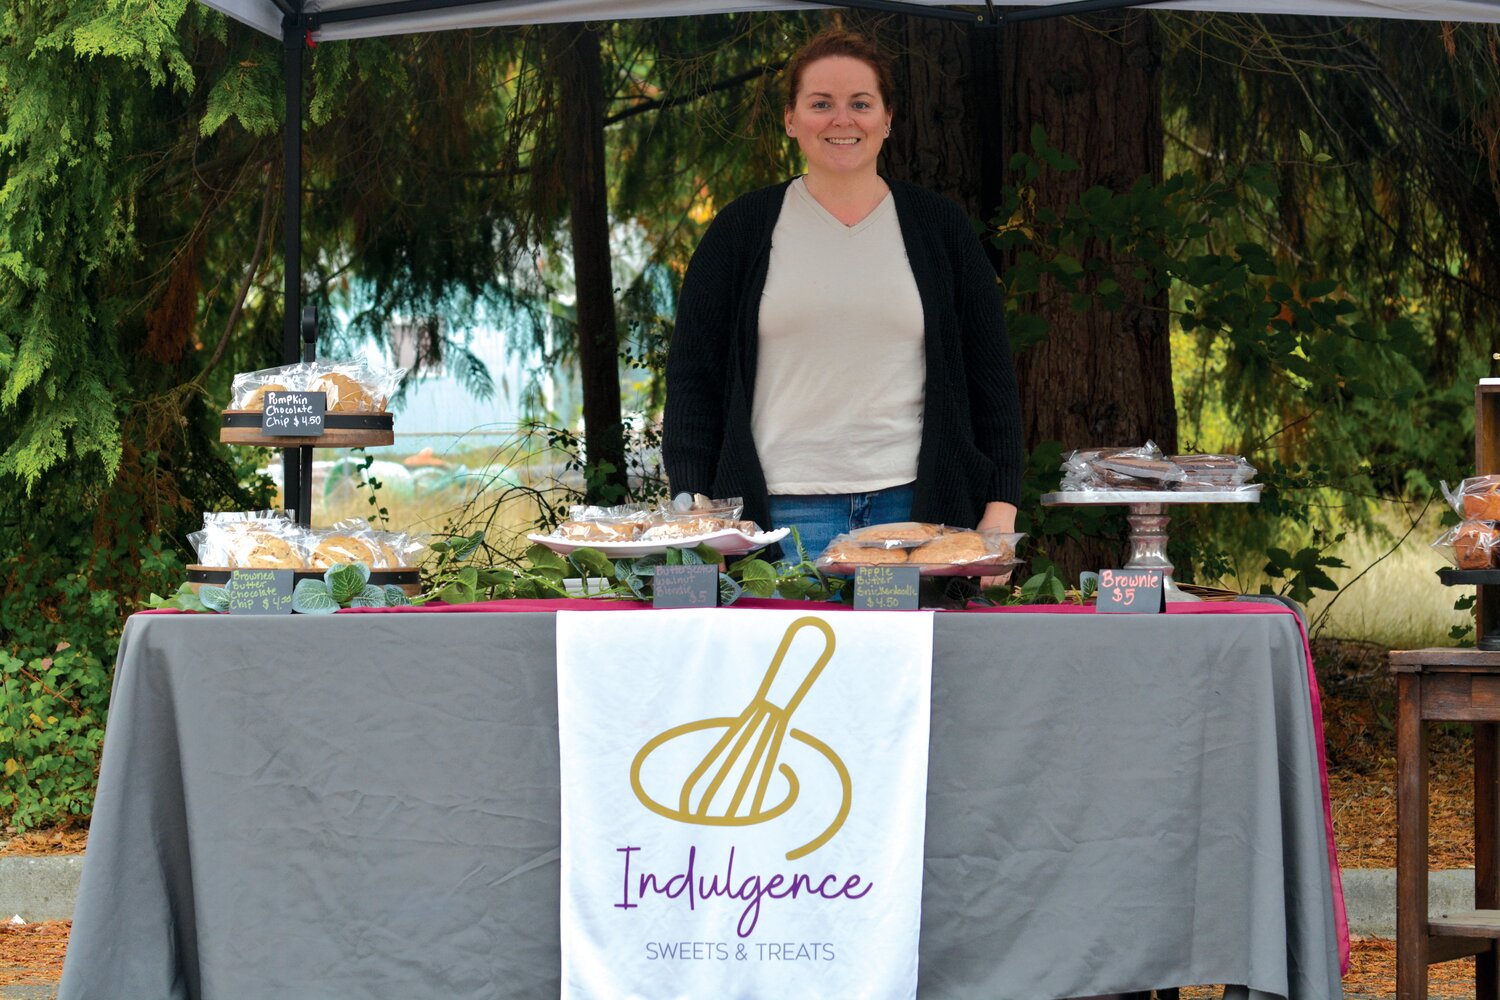 Andrea Saffer, with Indulgence Sweets and Treats, smiles at the final Yelm Farmers Market of the year.